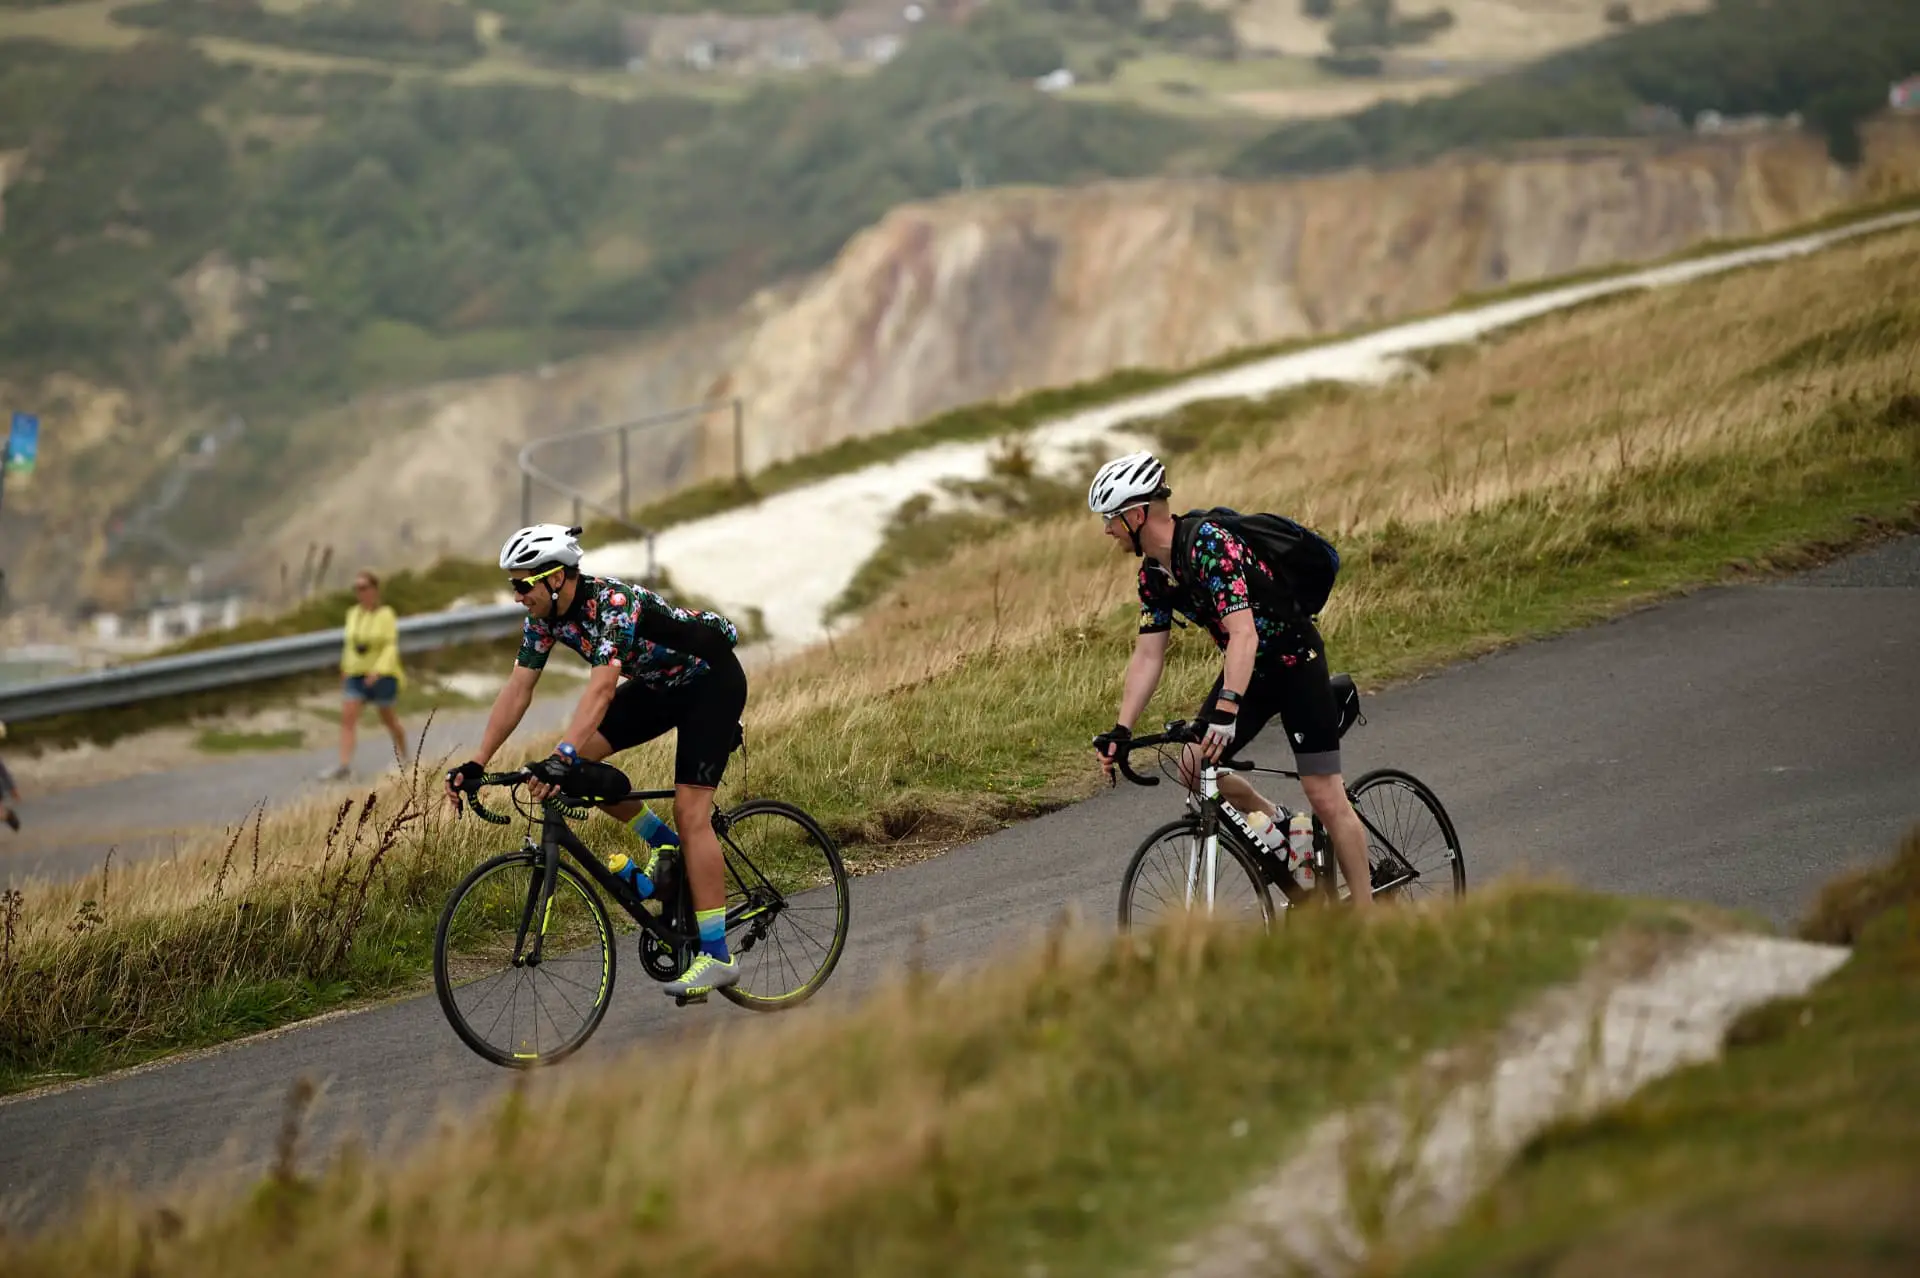 Cyclists on road at the Needles Old Battery - National Trust Images, John Millar